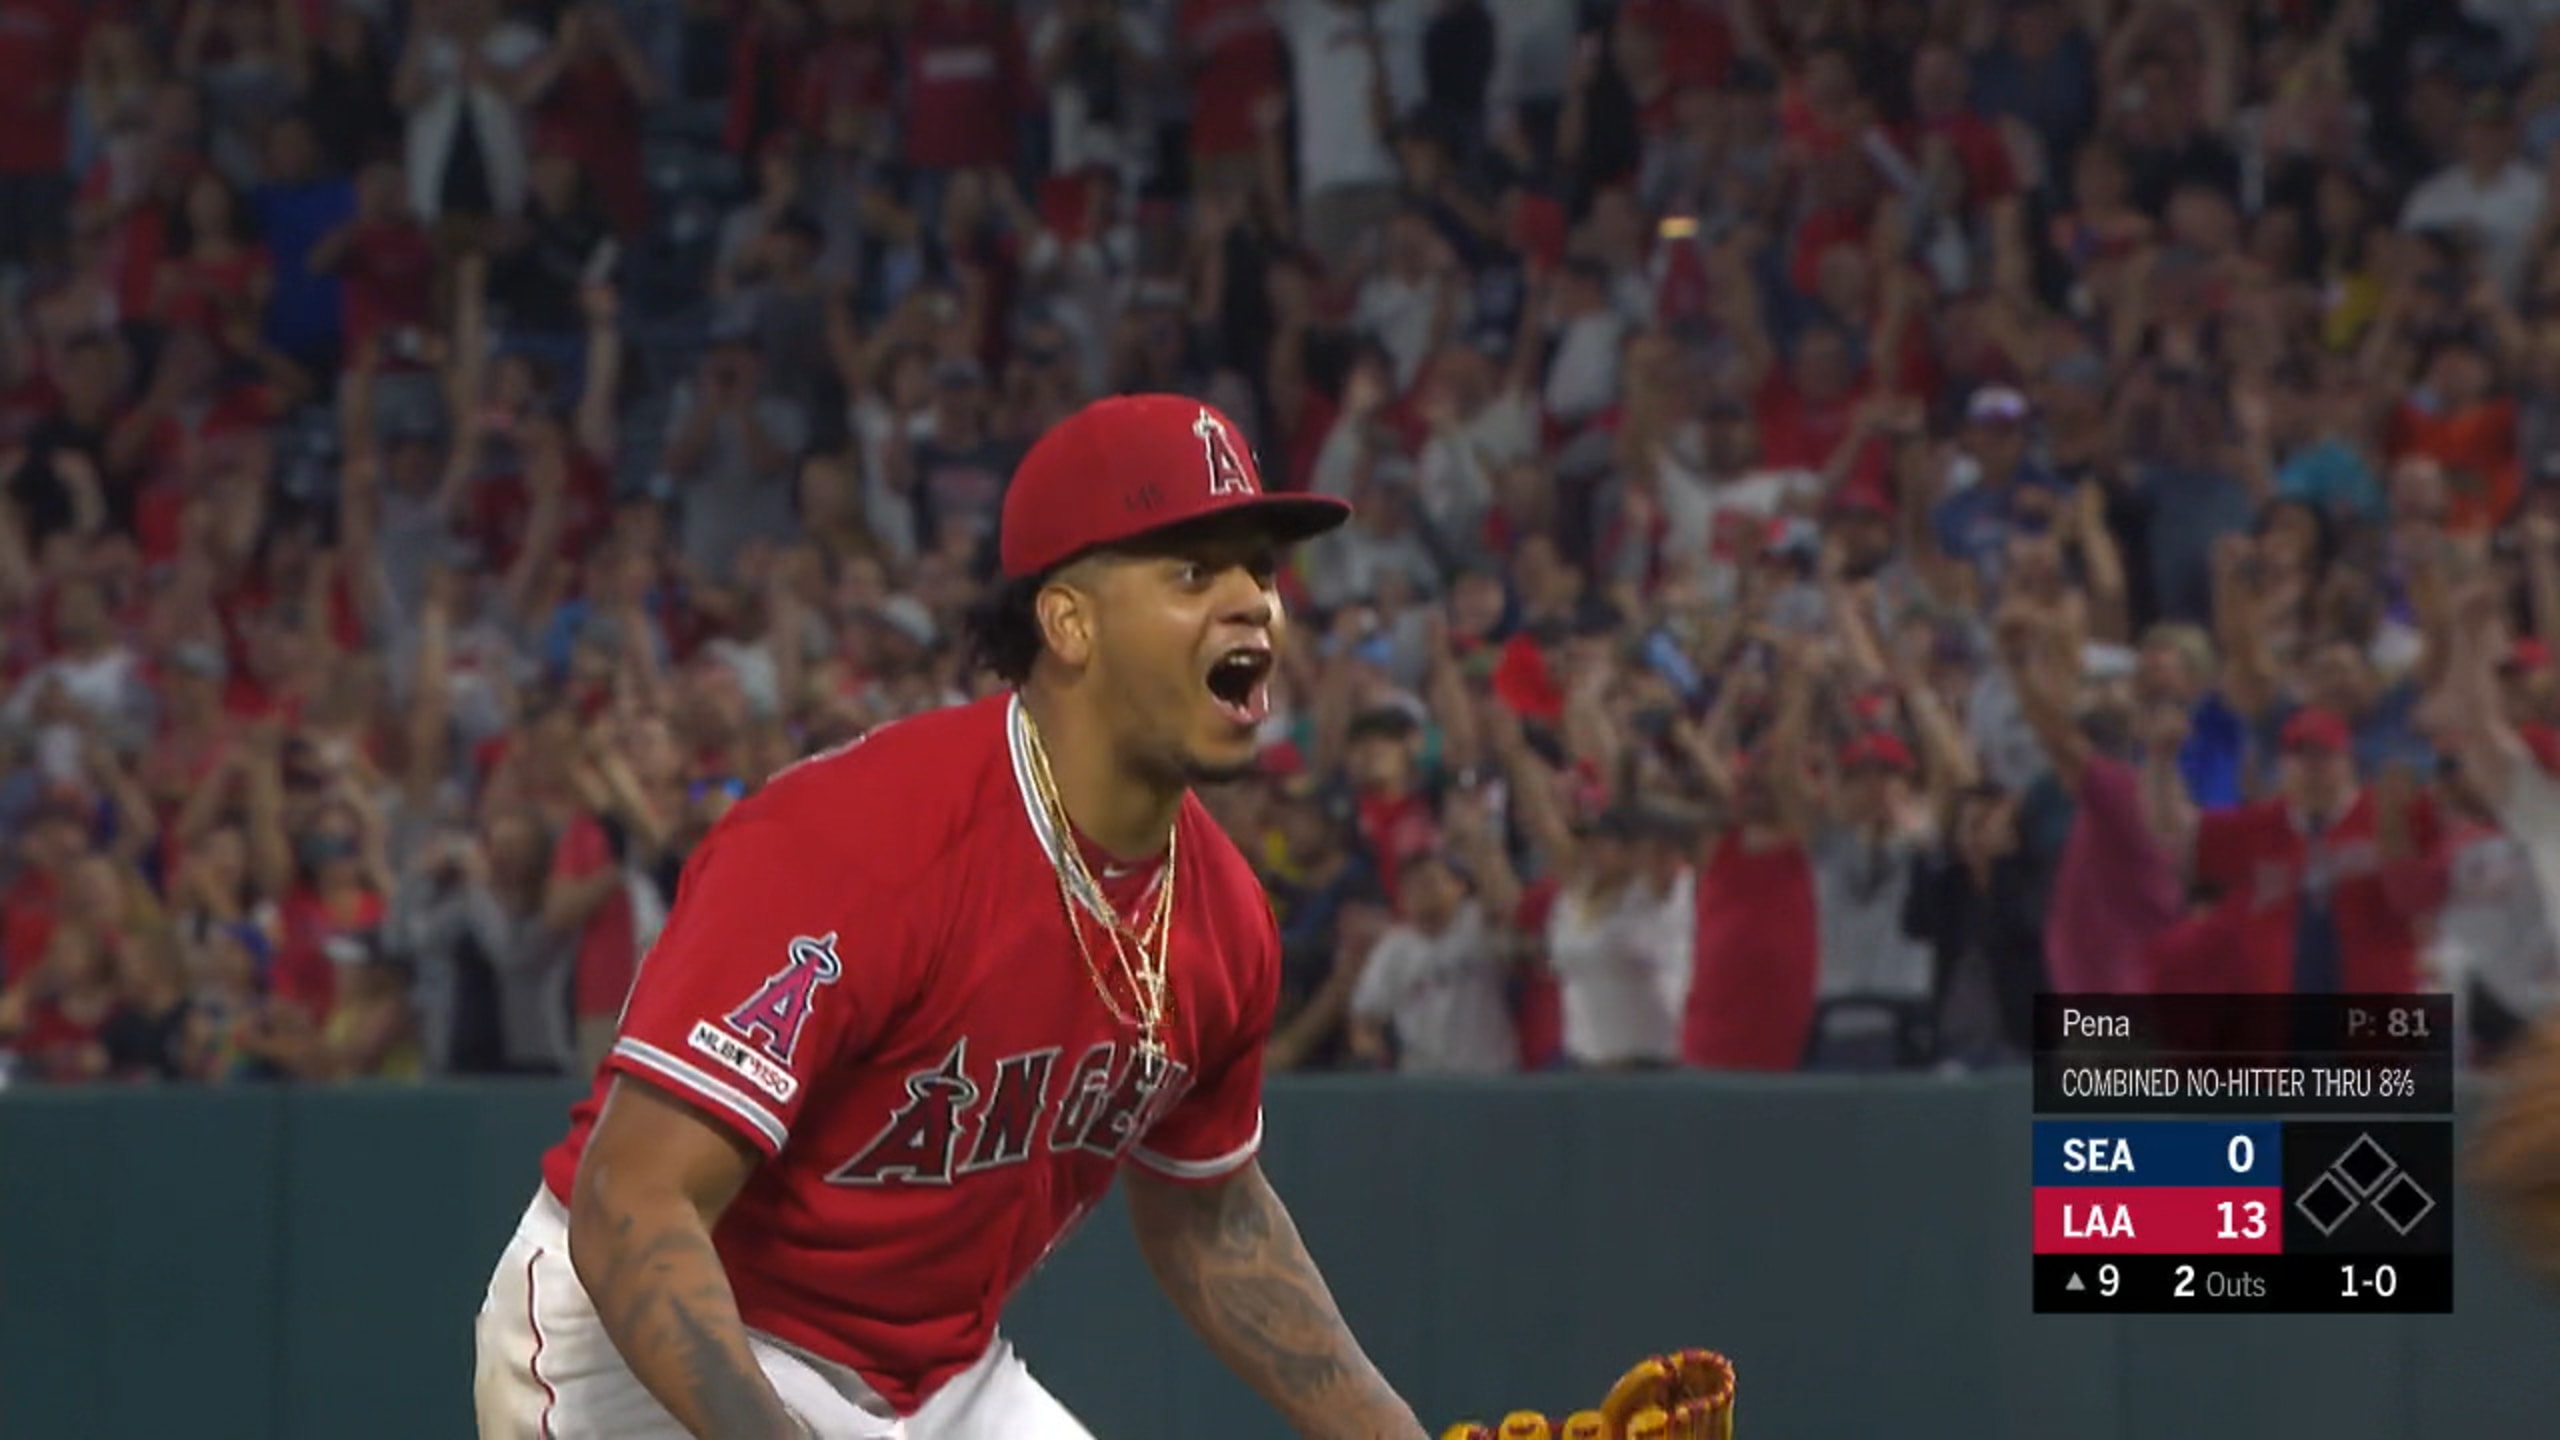 Angels throw no-hitter in first home game since Tyler Skaggs' death